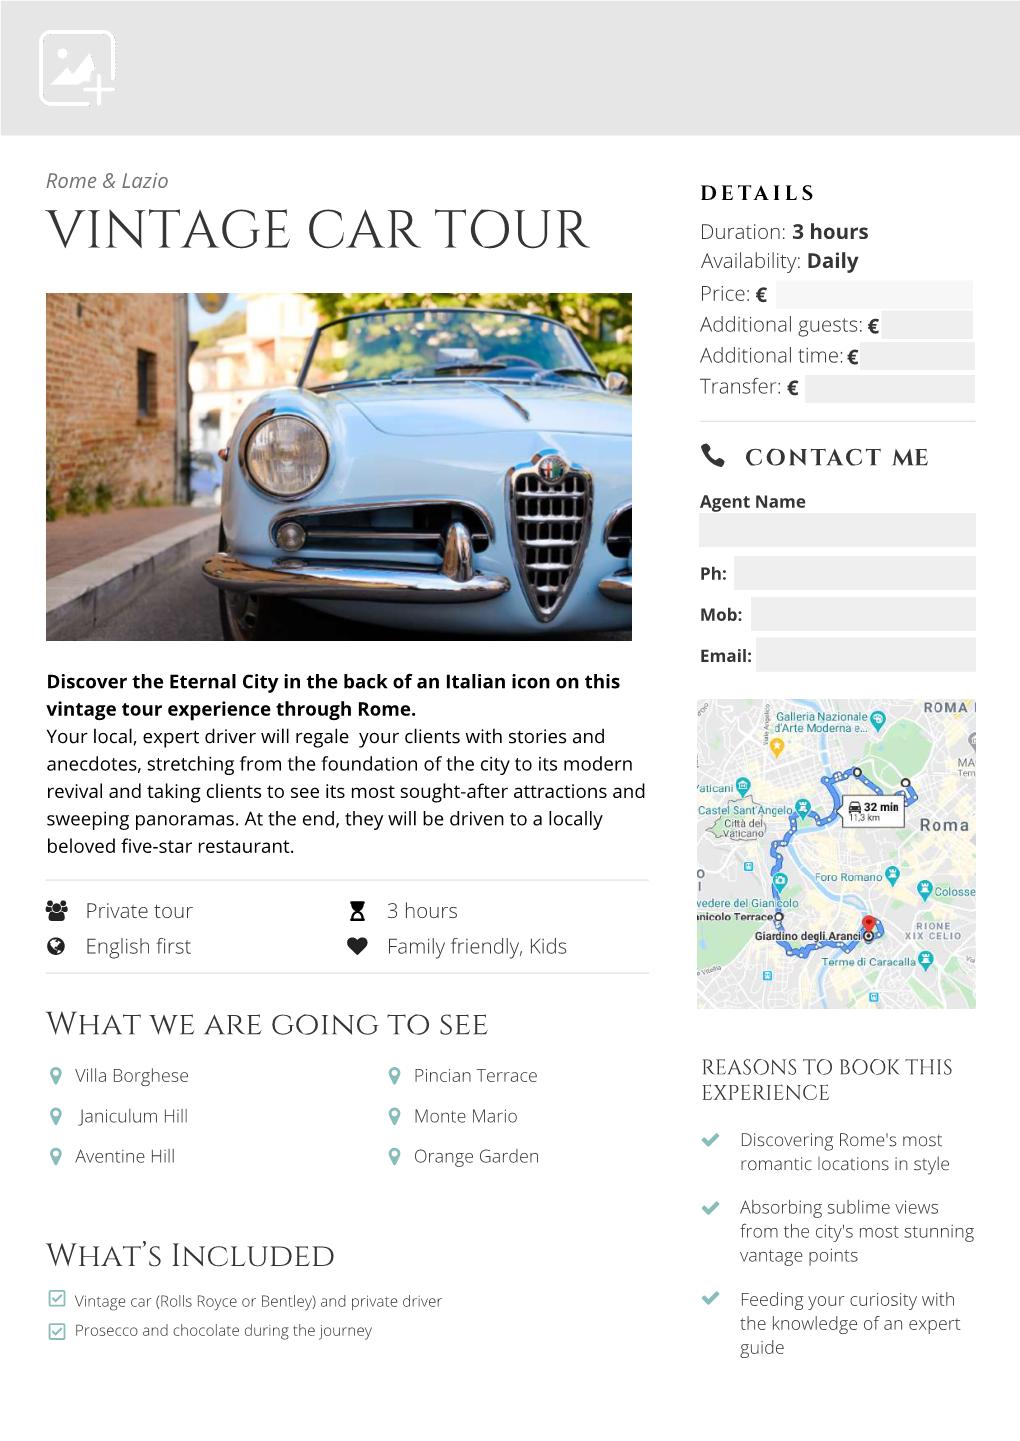 VINTAGE CAR TOUR Duration: 3 Hours Availability: Daily Price: € Additional Guests: € Additional Time: € Transfer: €